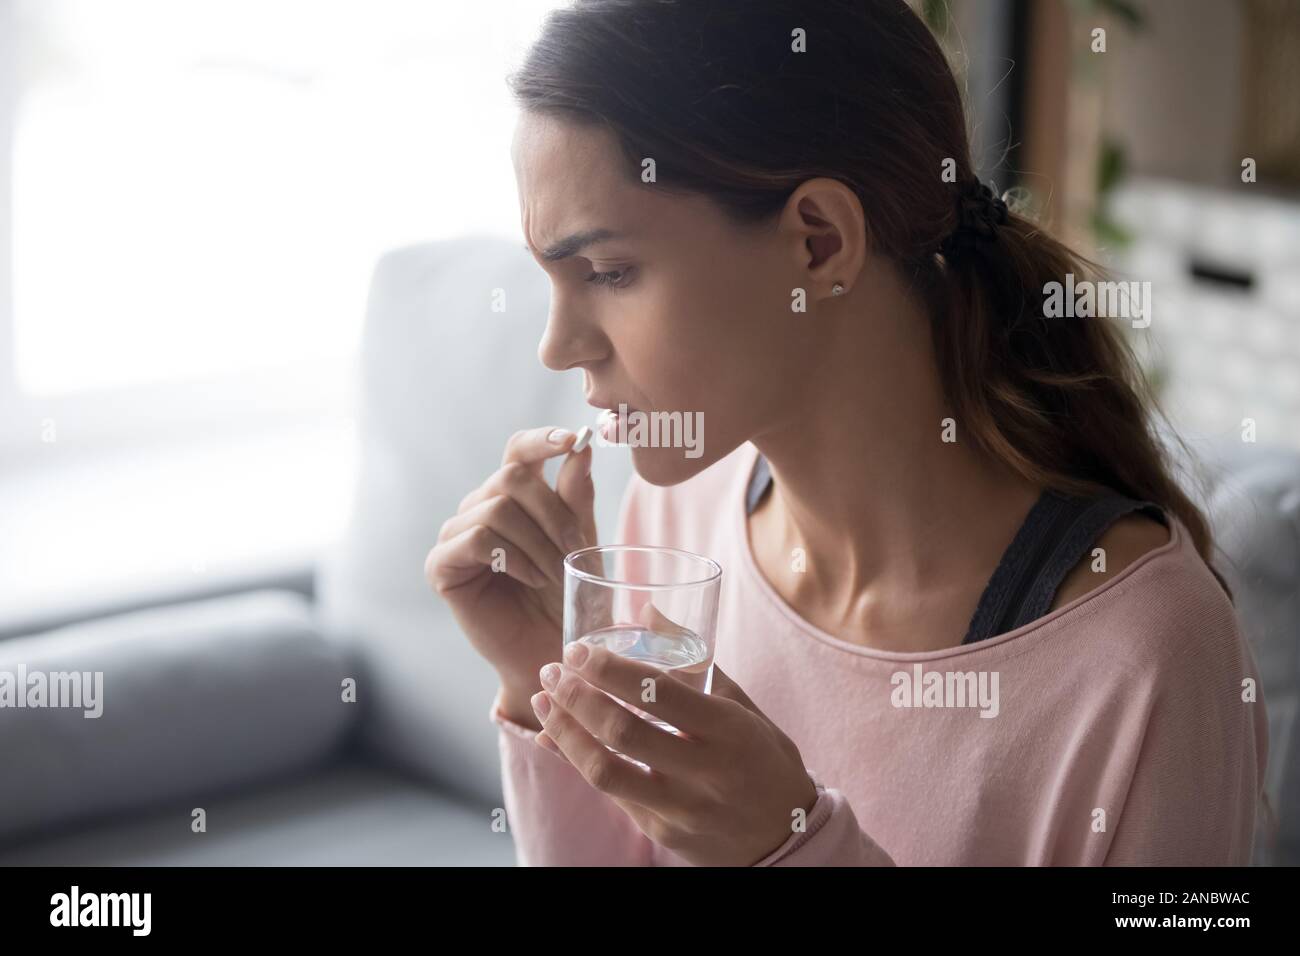 Stressed upset young girl taking medicine side view. Stock Photo